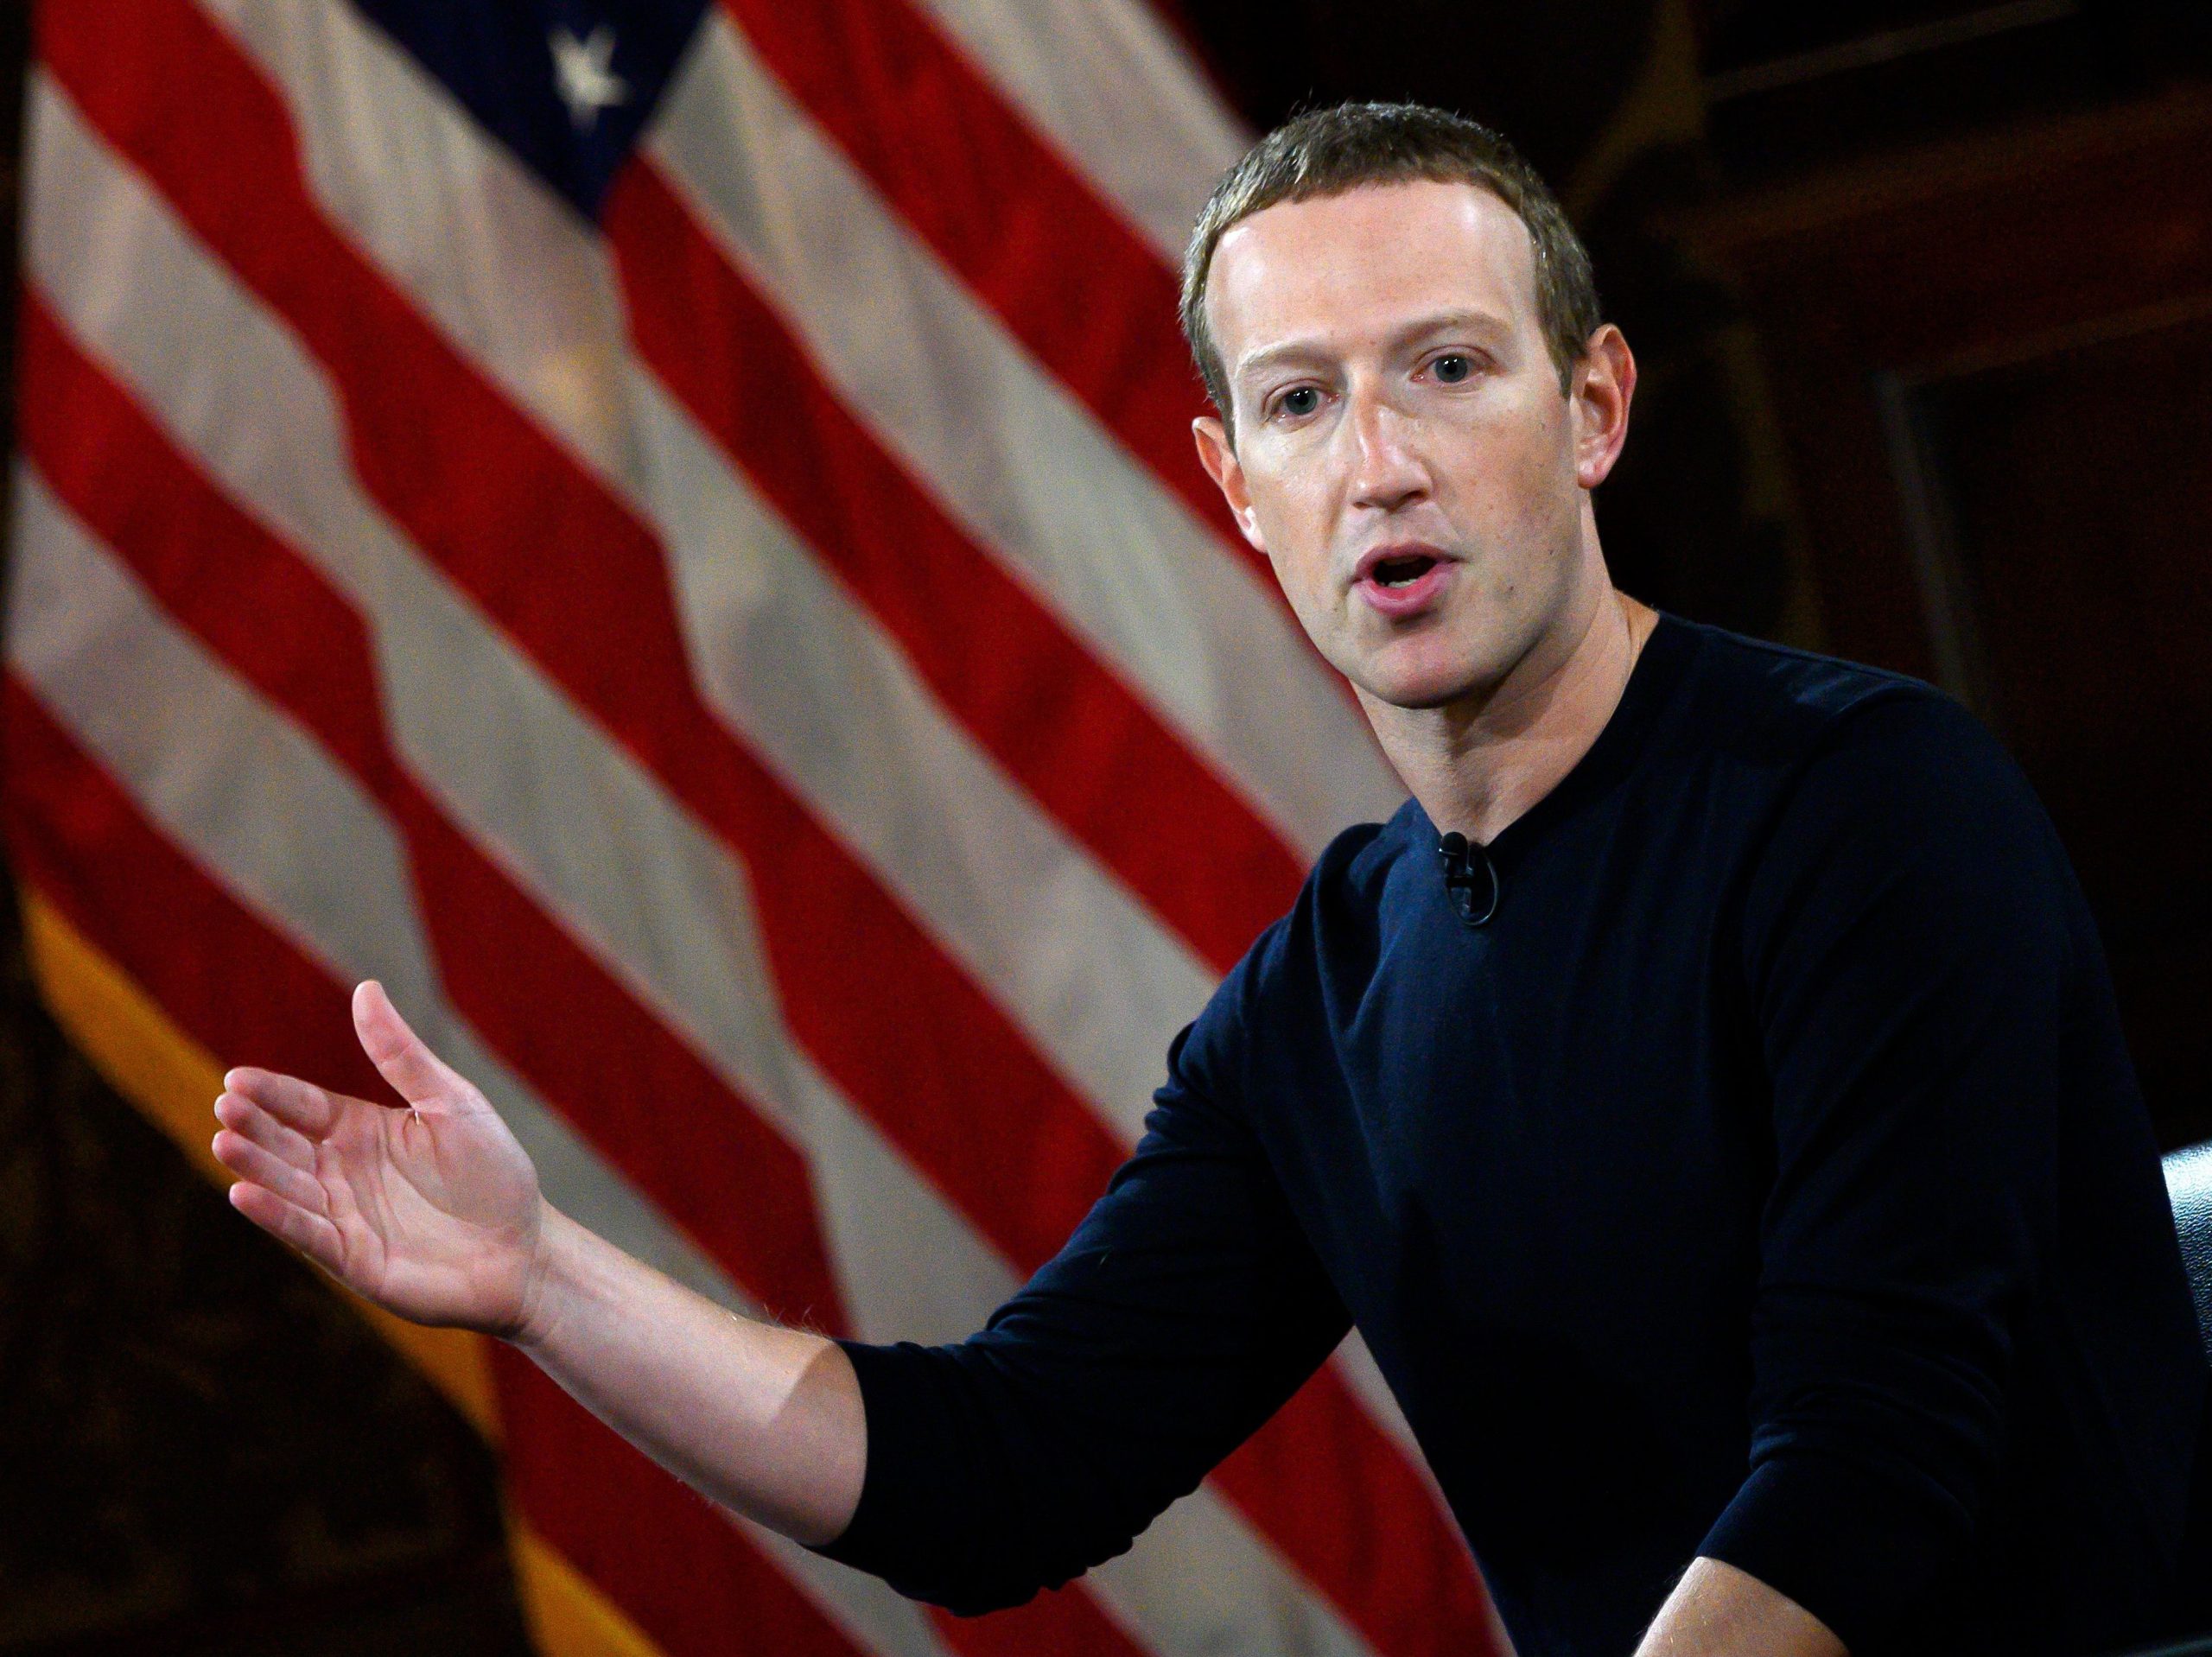 Facebook CEO Mark Zuckerberg is under pressure from employees who say President Trump is violating the social network's rules against inciting violence.